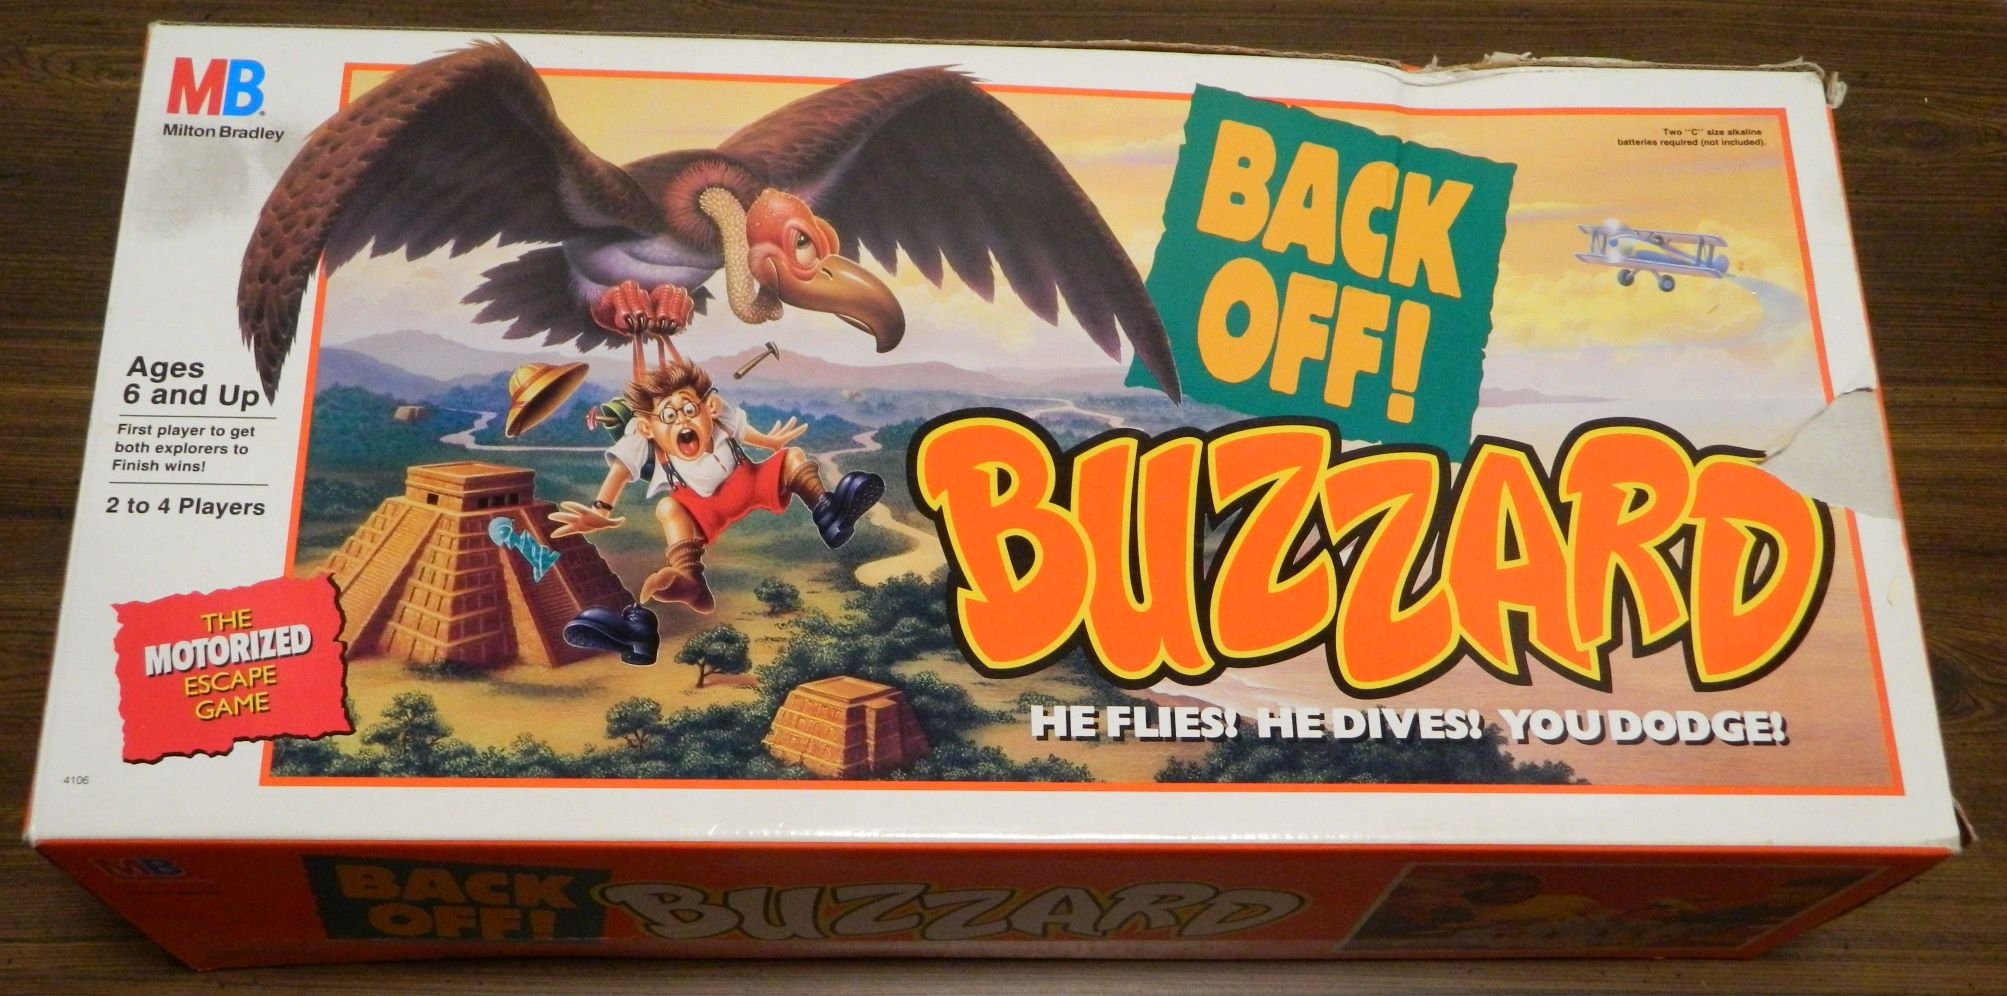 Back Off! Buzzard Board Game Review and Rules